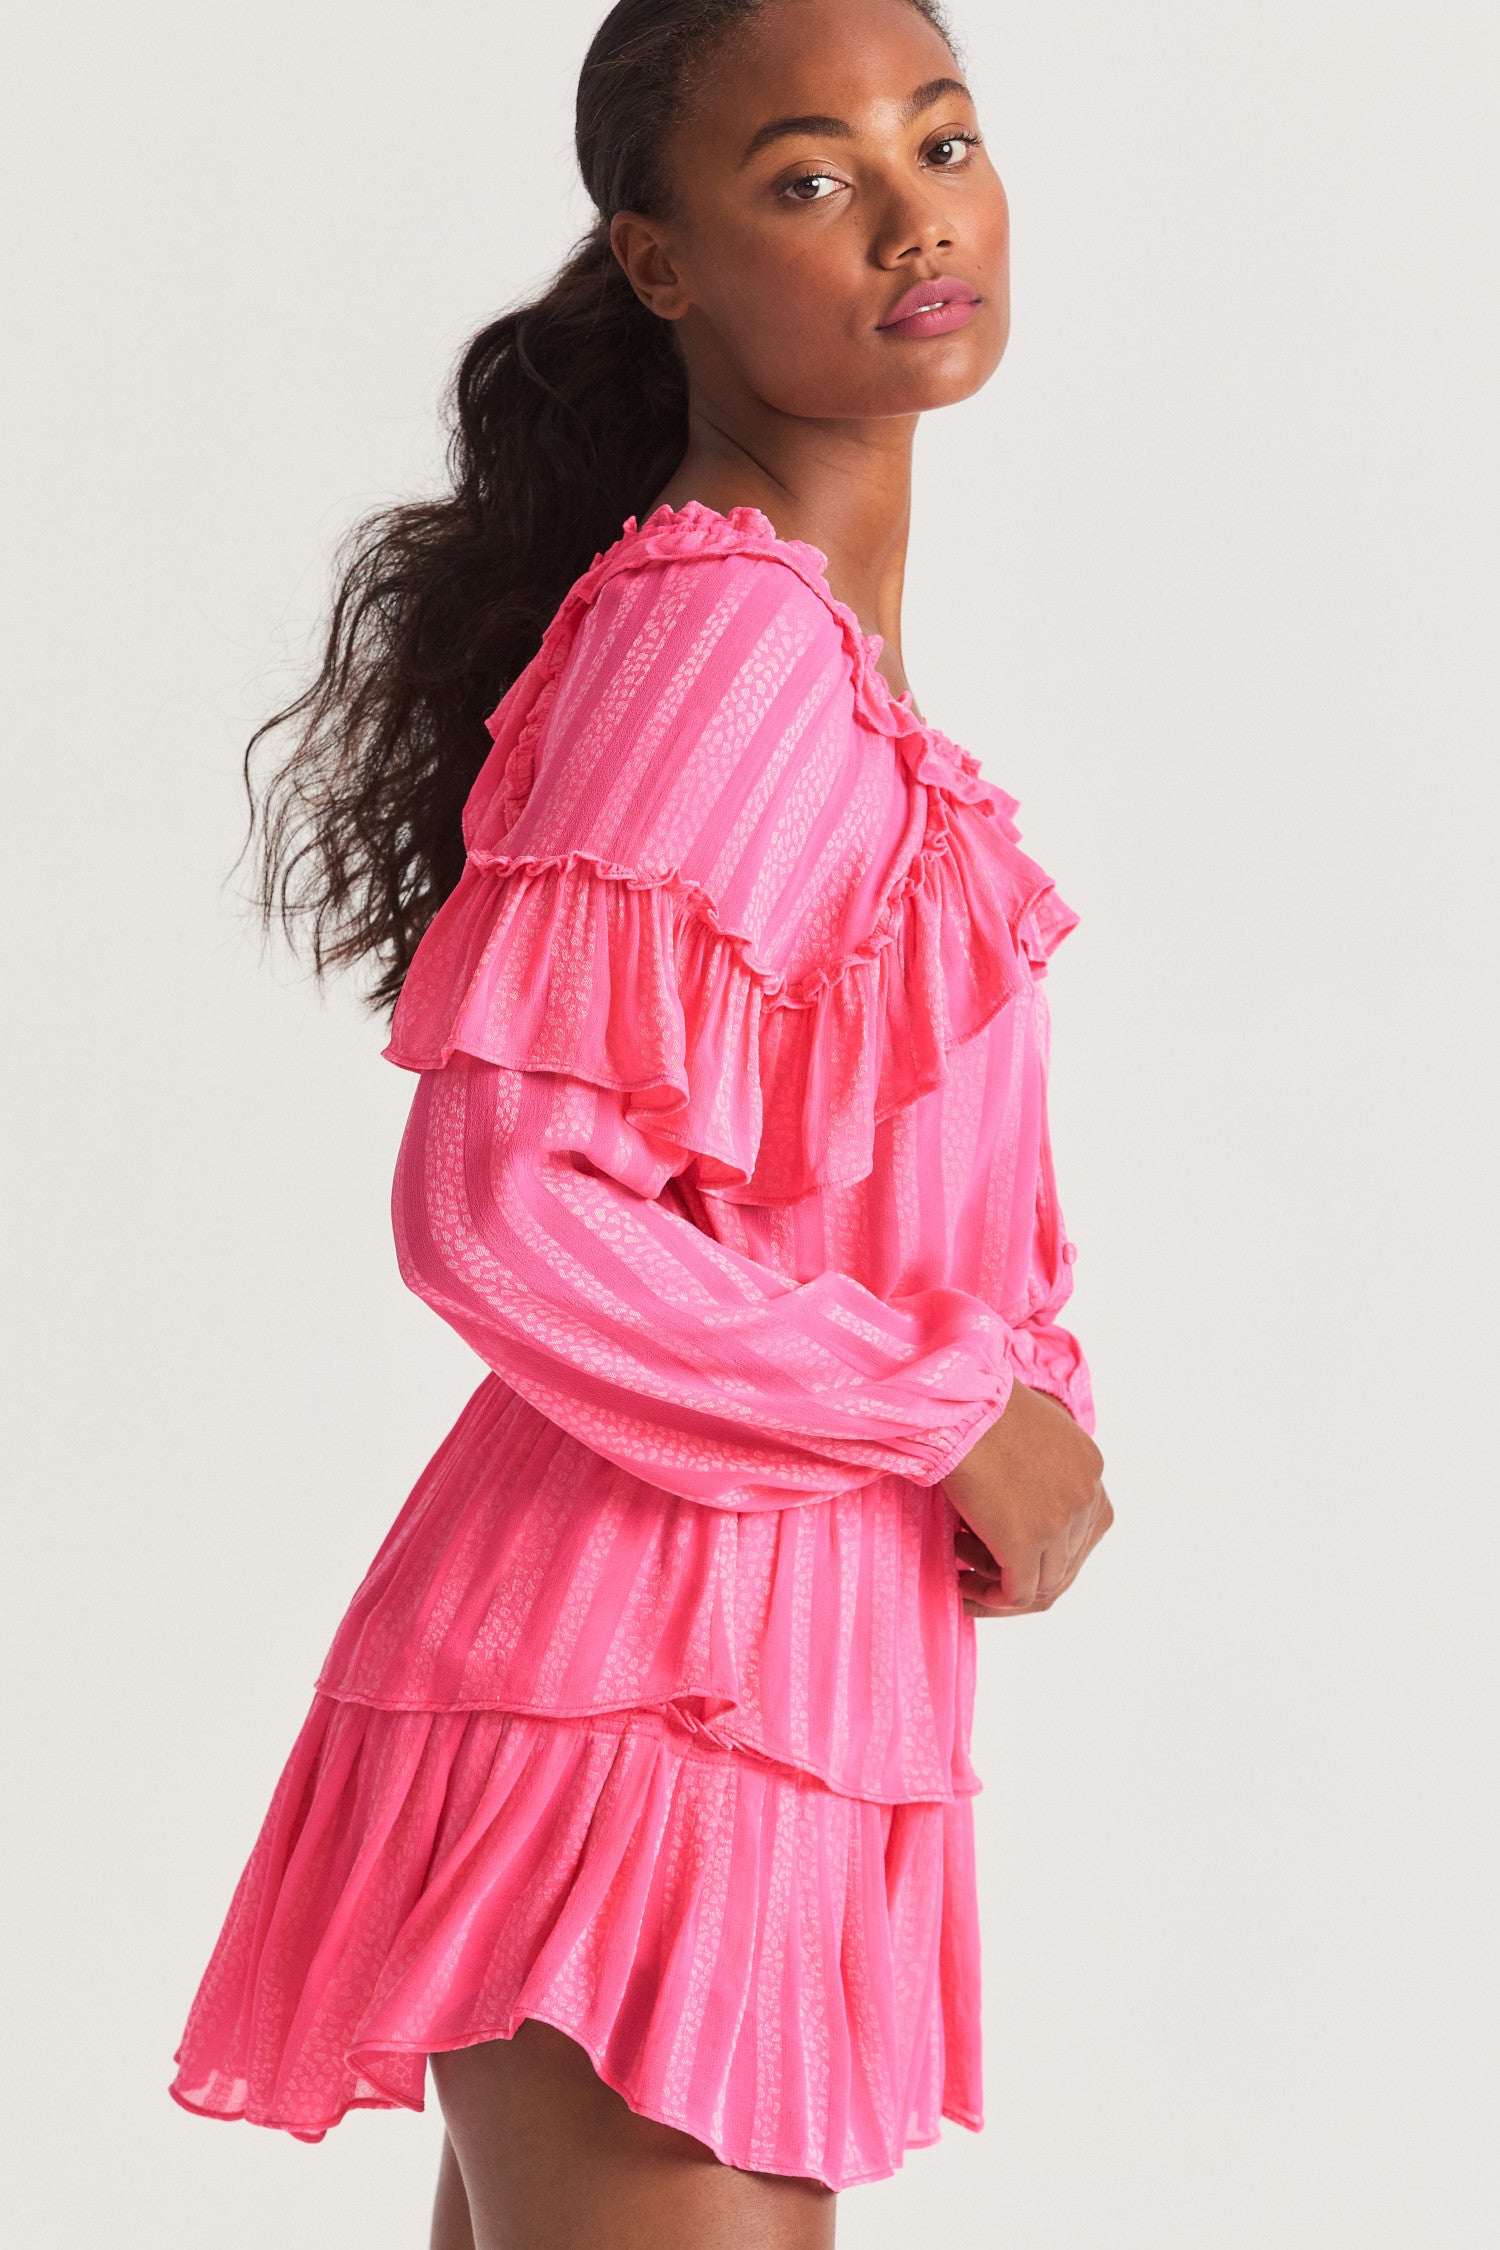 Pink long sleeved-top features a striped jacquard fabric, dramatic ruffles all over, an elasticated waist, elastic at the sleeve openings, and a fully functioning center front slit.